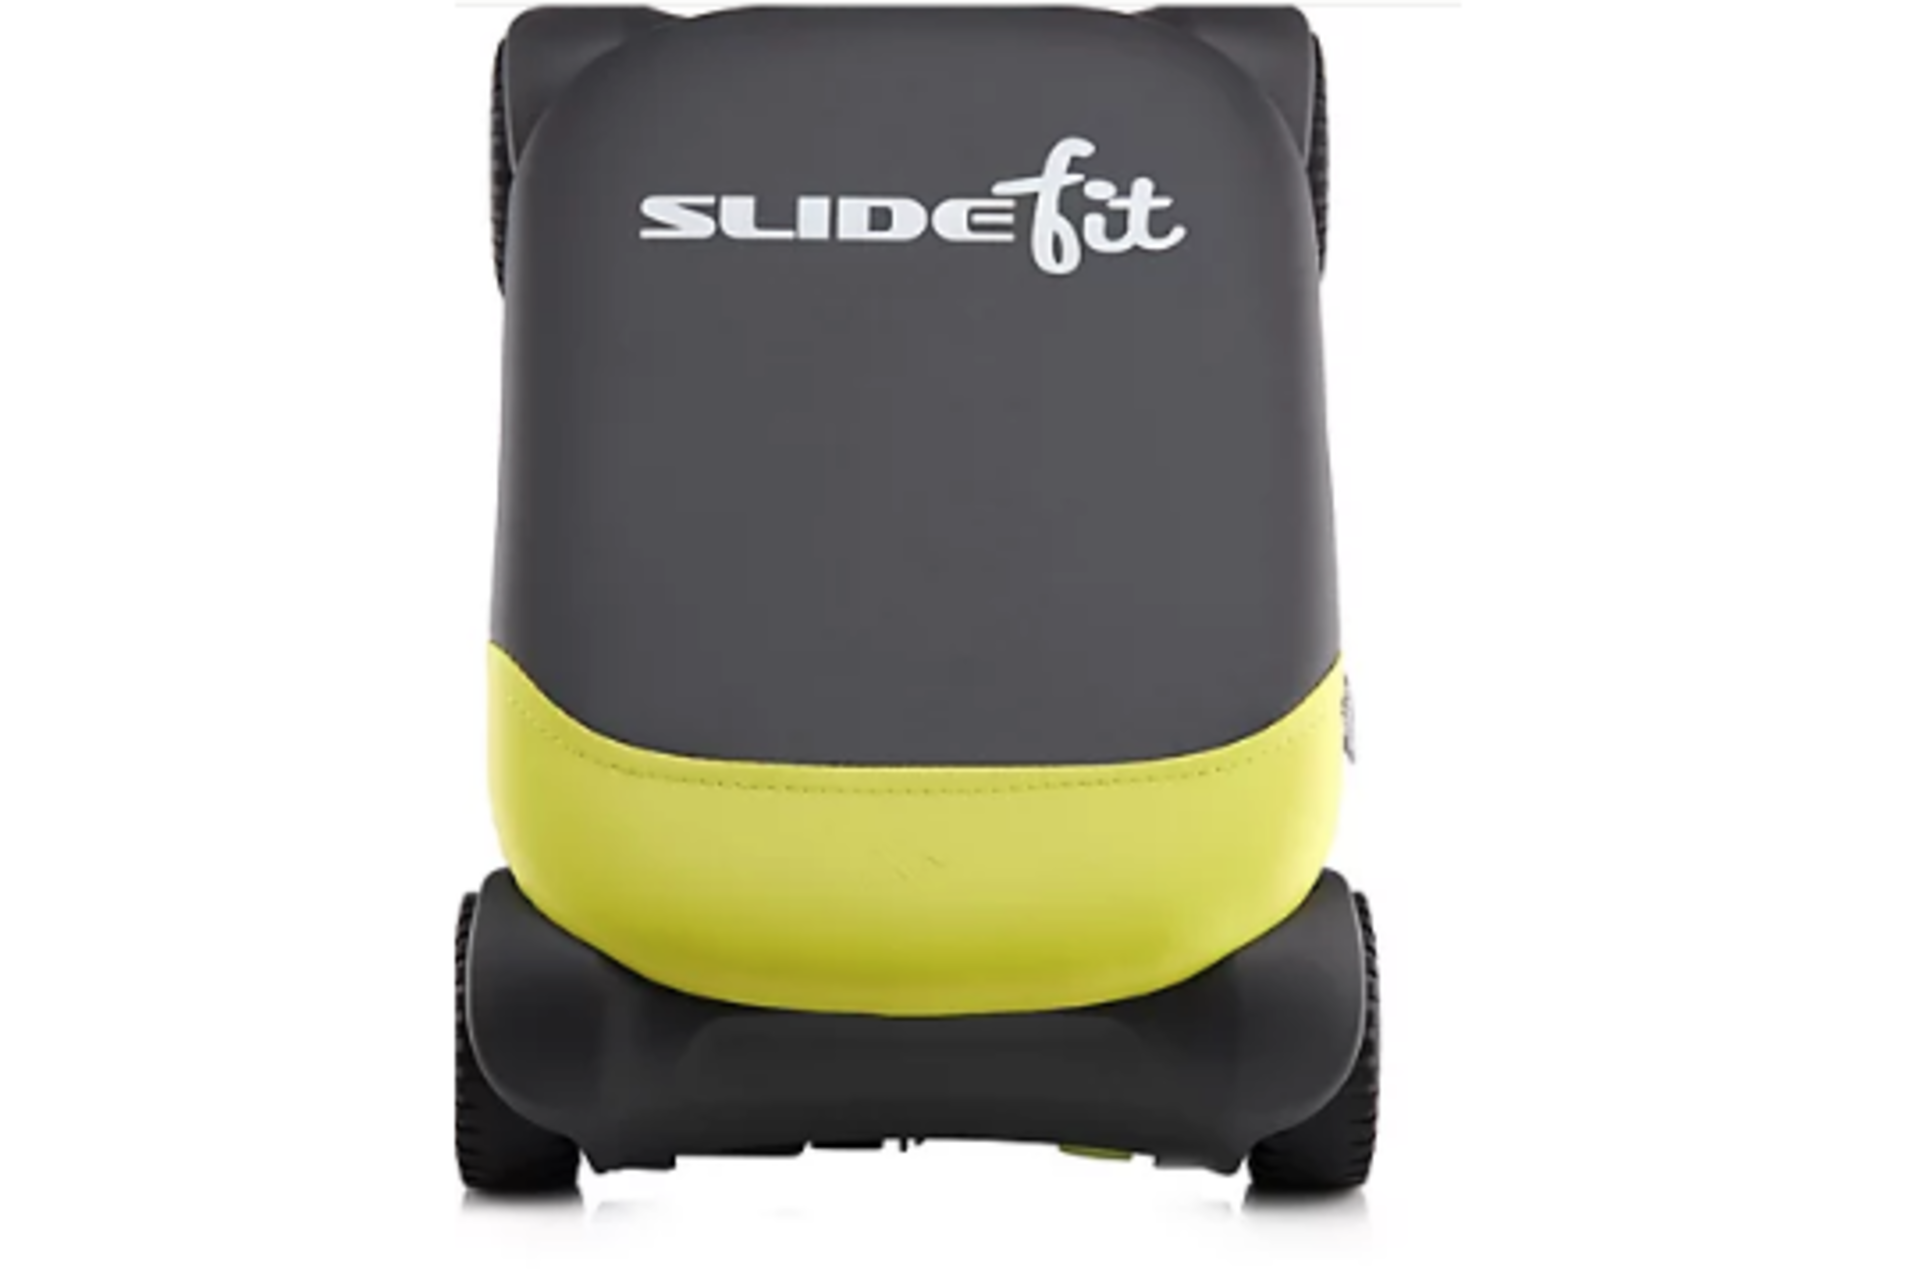 RRP £162 Lot To Contain 2 Items - 1 X Wondercore Slide Fit Exercise Resistance System & 1 X Davina